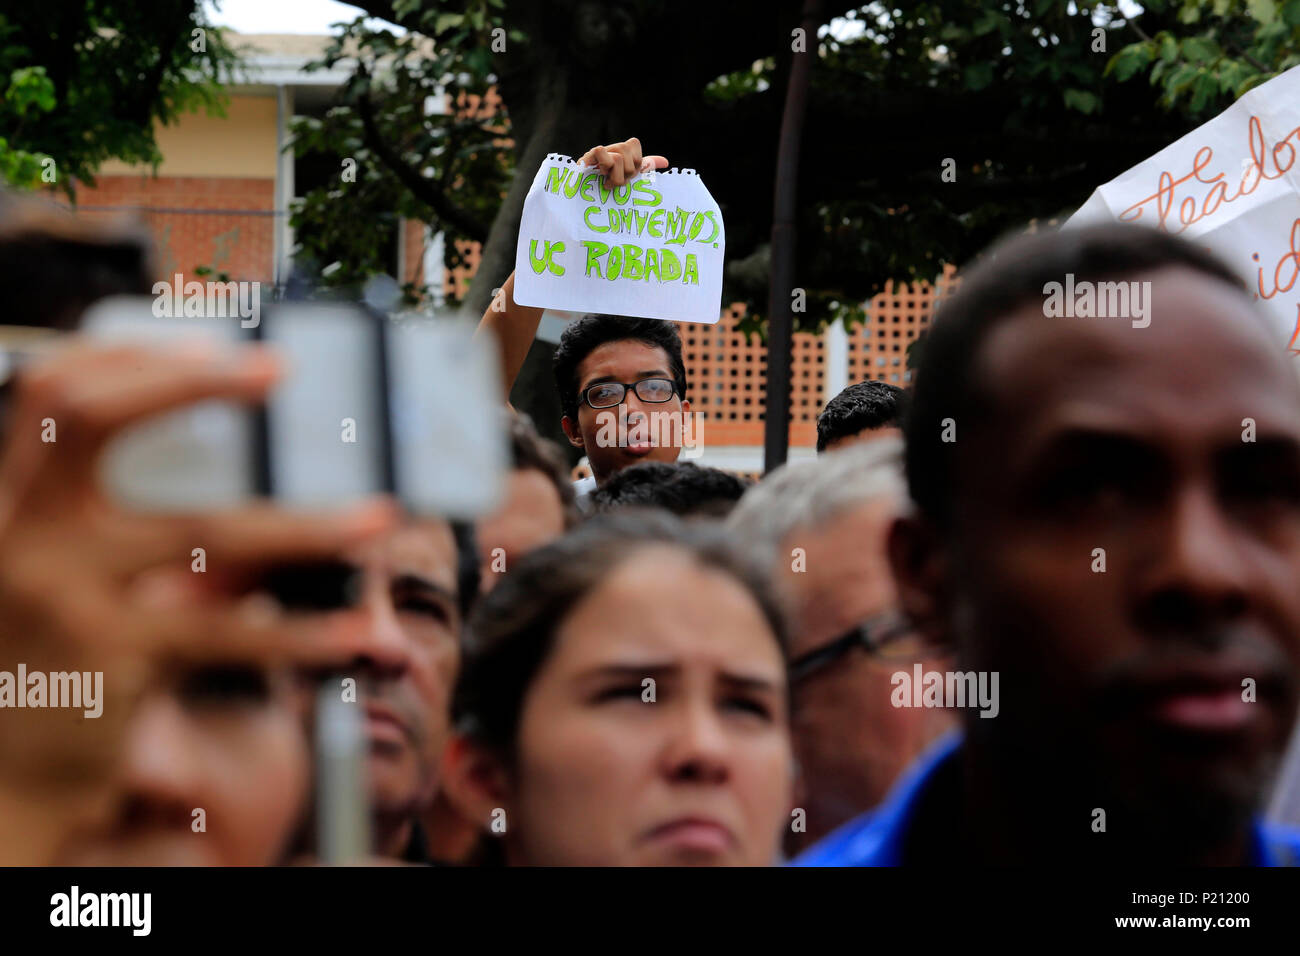 Valencia, Carabobo, Venezuela. 13th June, 2018. Students, professors and staff working at the University of Carabobo, UC, accompanied the authorities in the protest called 'Resteados con la UC'. It demanded improvements in security, the dining room, staff salaries, among many others, and was carried out in the Arco de Barbula, emblematic entrance to the campus. Credit: Juan Carlos Hernandez/ZUMA Wire/ZUMAPRESS.com/Alamy Live News Stock Photo